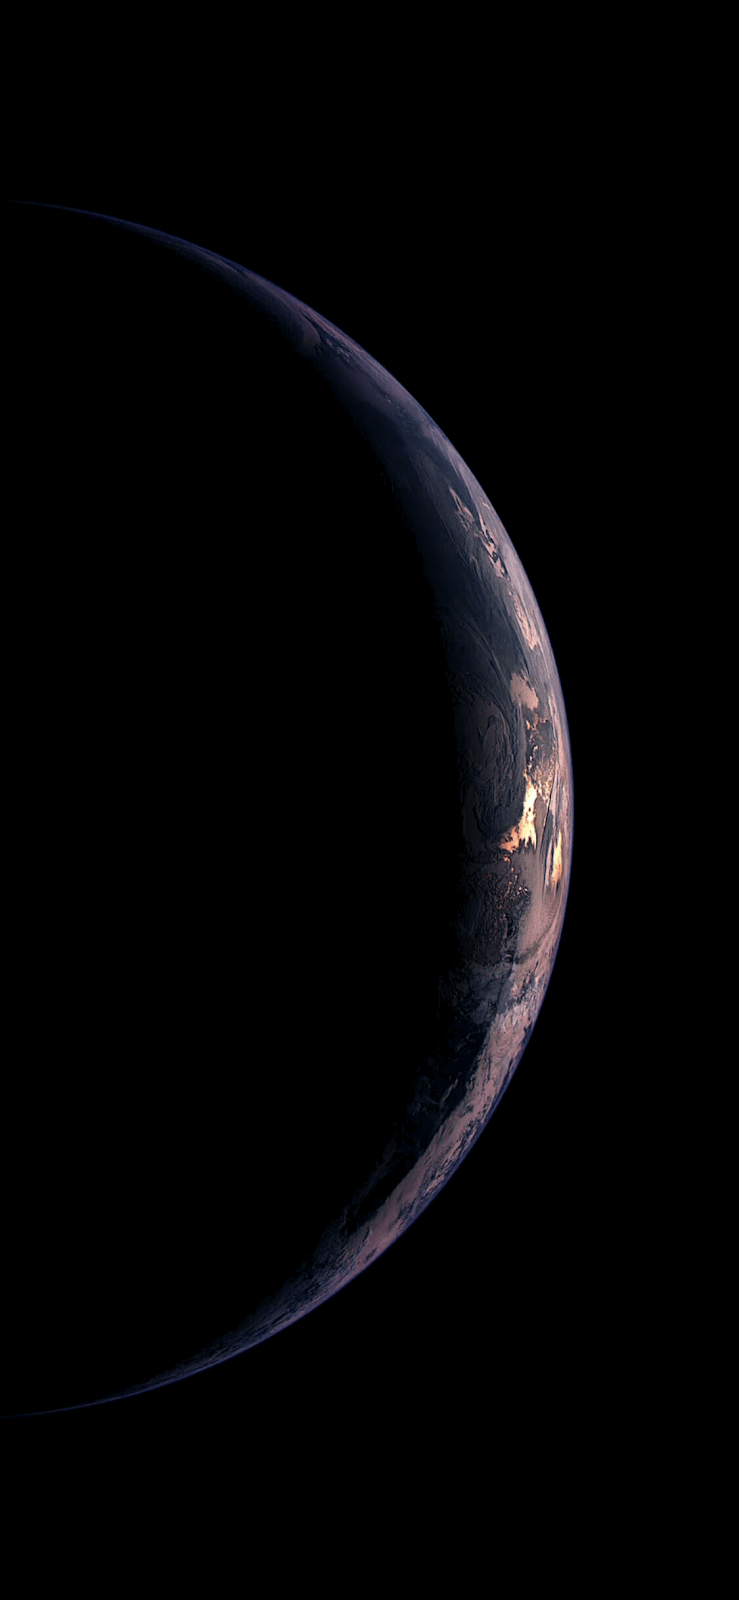 Earth For IPhone X XS ( For Amoled Display) #wallpaper #iphone #android # Background #followme. IPhone Wallpaper Earth, Wallpaper Earth, Wallpaper Iphone Neon